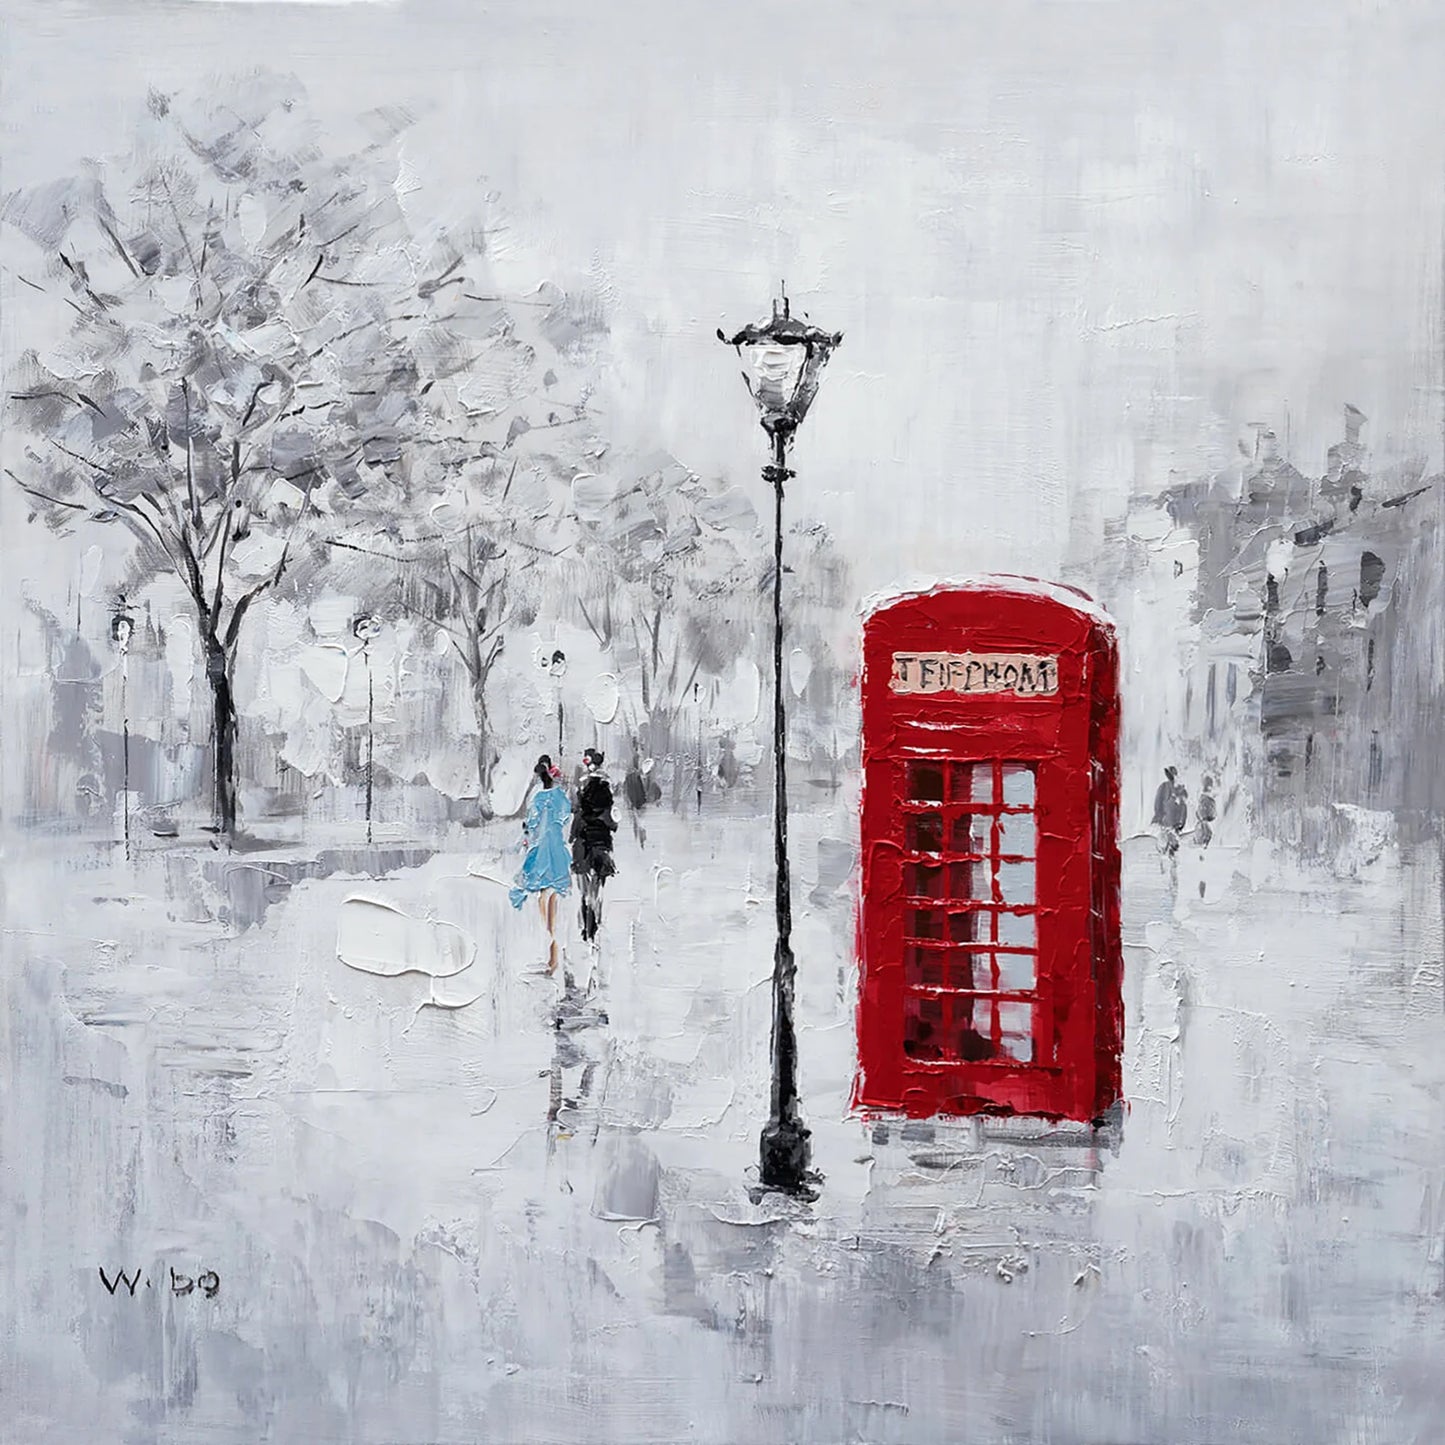 Original Modern art "Crimson Connection - Telephone Booth" hand-painted oil painting - wrapped Canvas